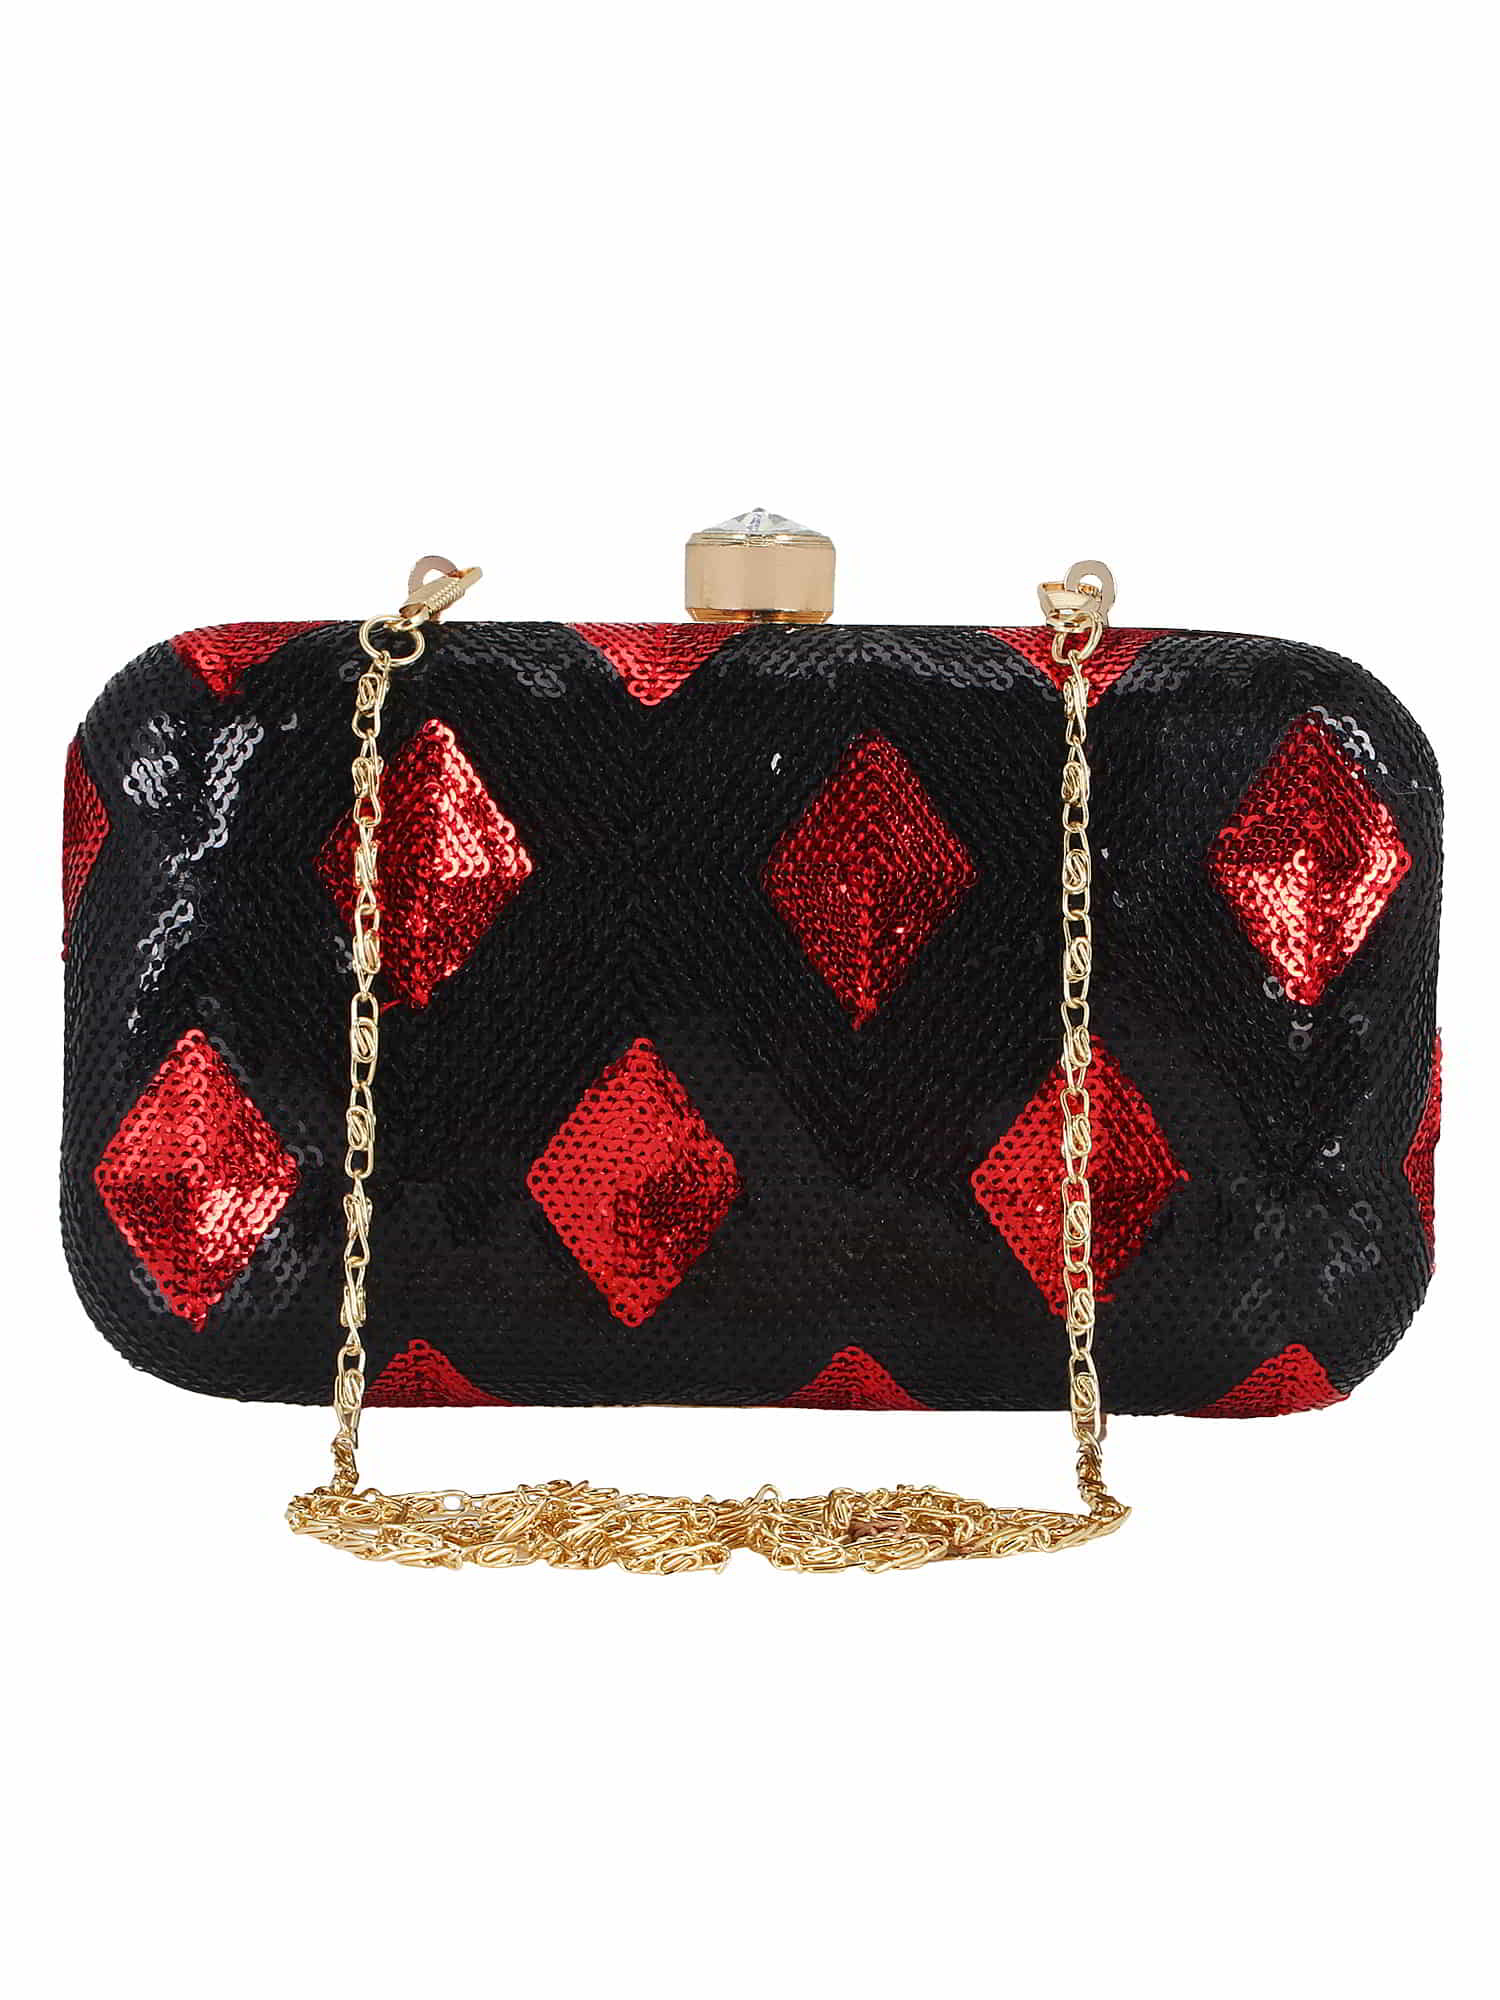 Adorn Sequined Party Clutch